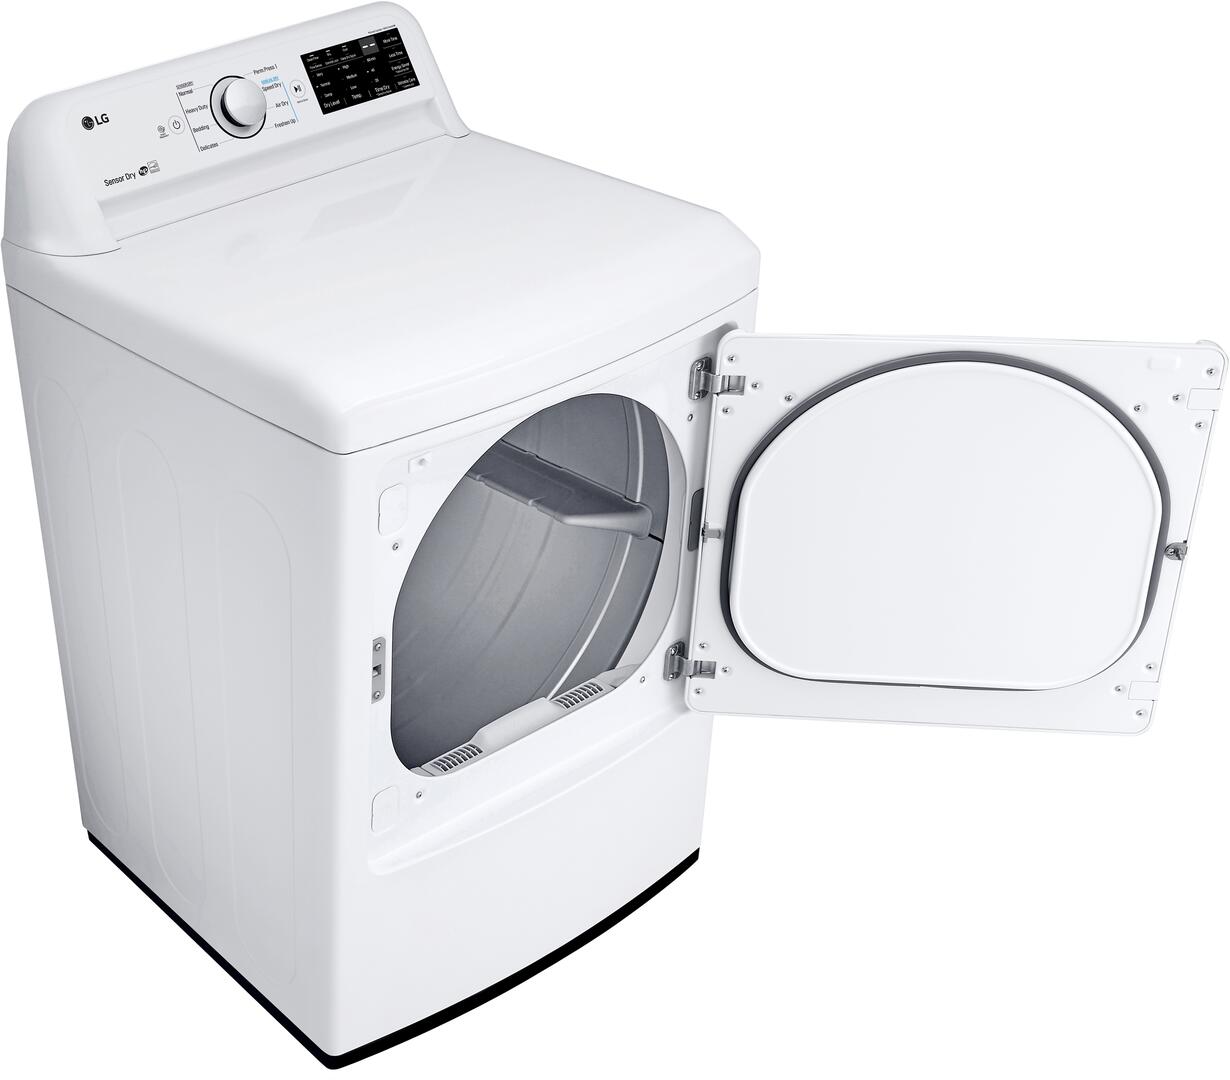 LG DLG7101W 27 Inch 7 3 Cu Ft Front Load Gas Dryer